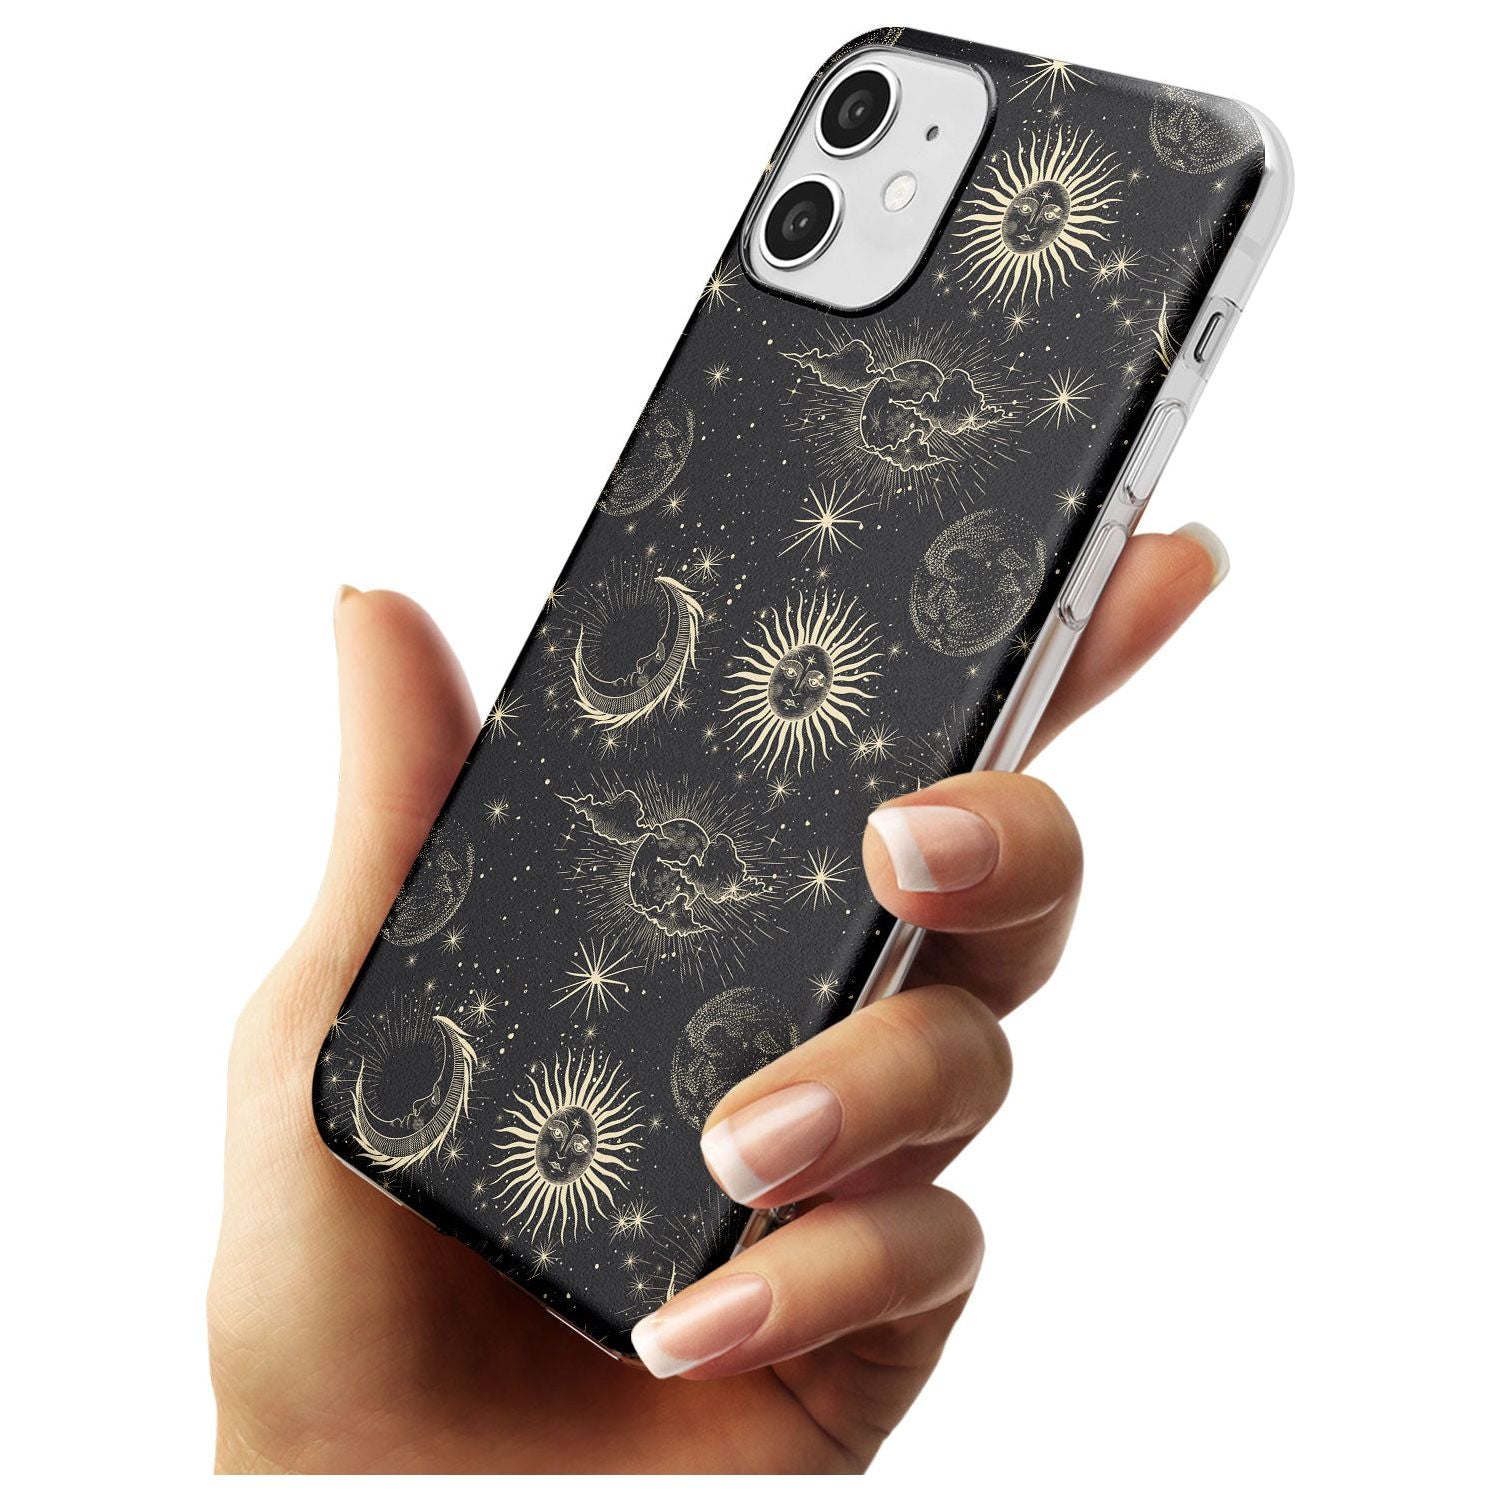 Large Suns, Moons & Clouds Black Impact Phone Case for iPhone 11